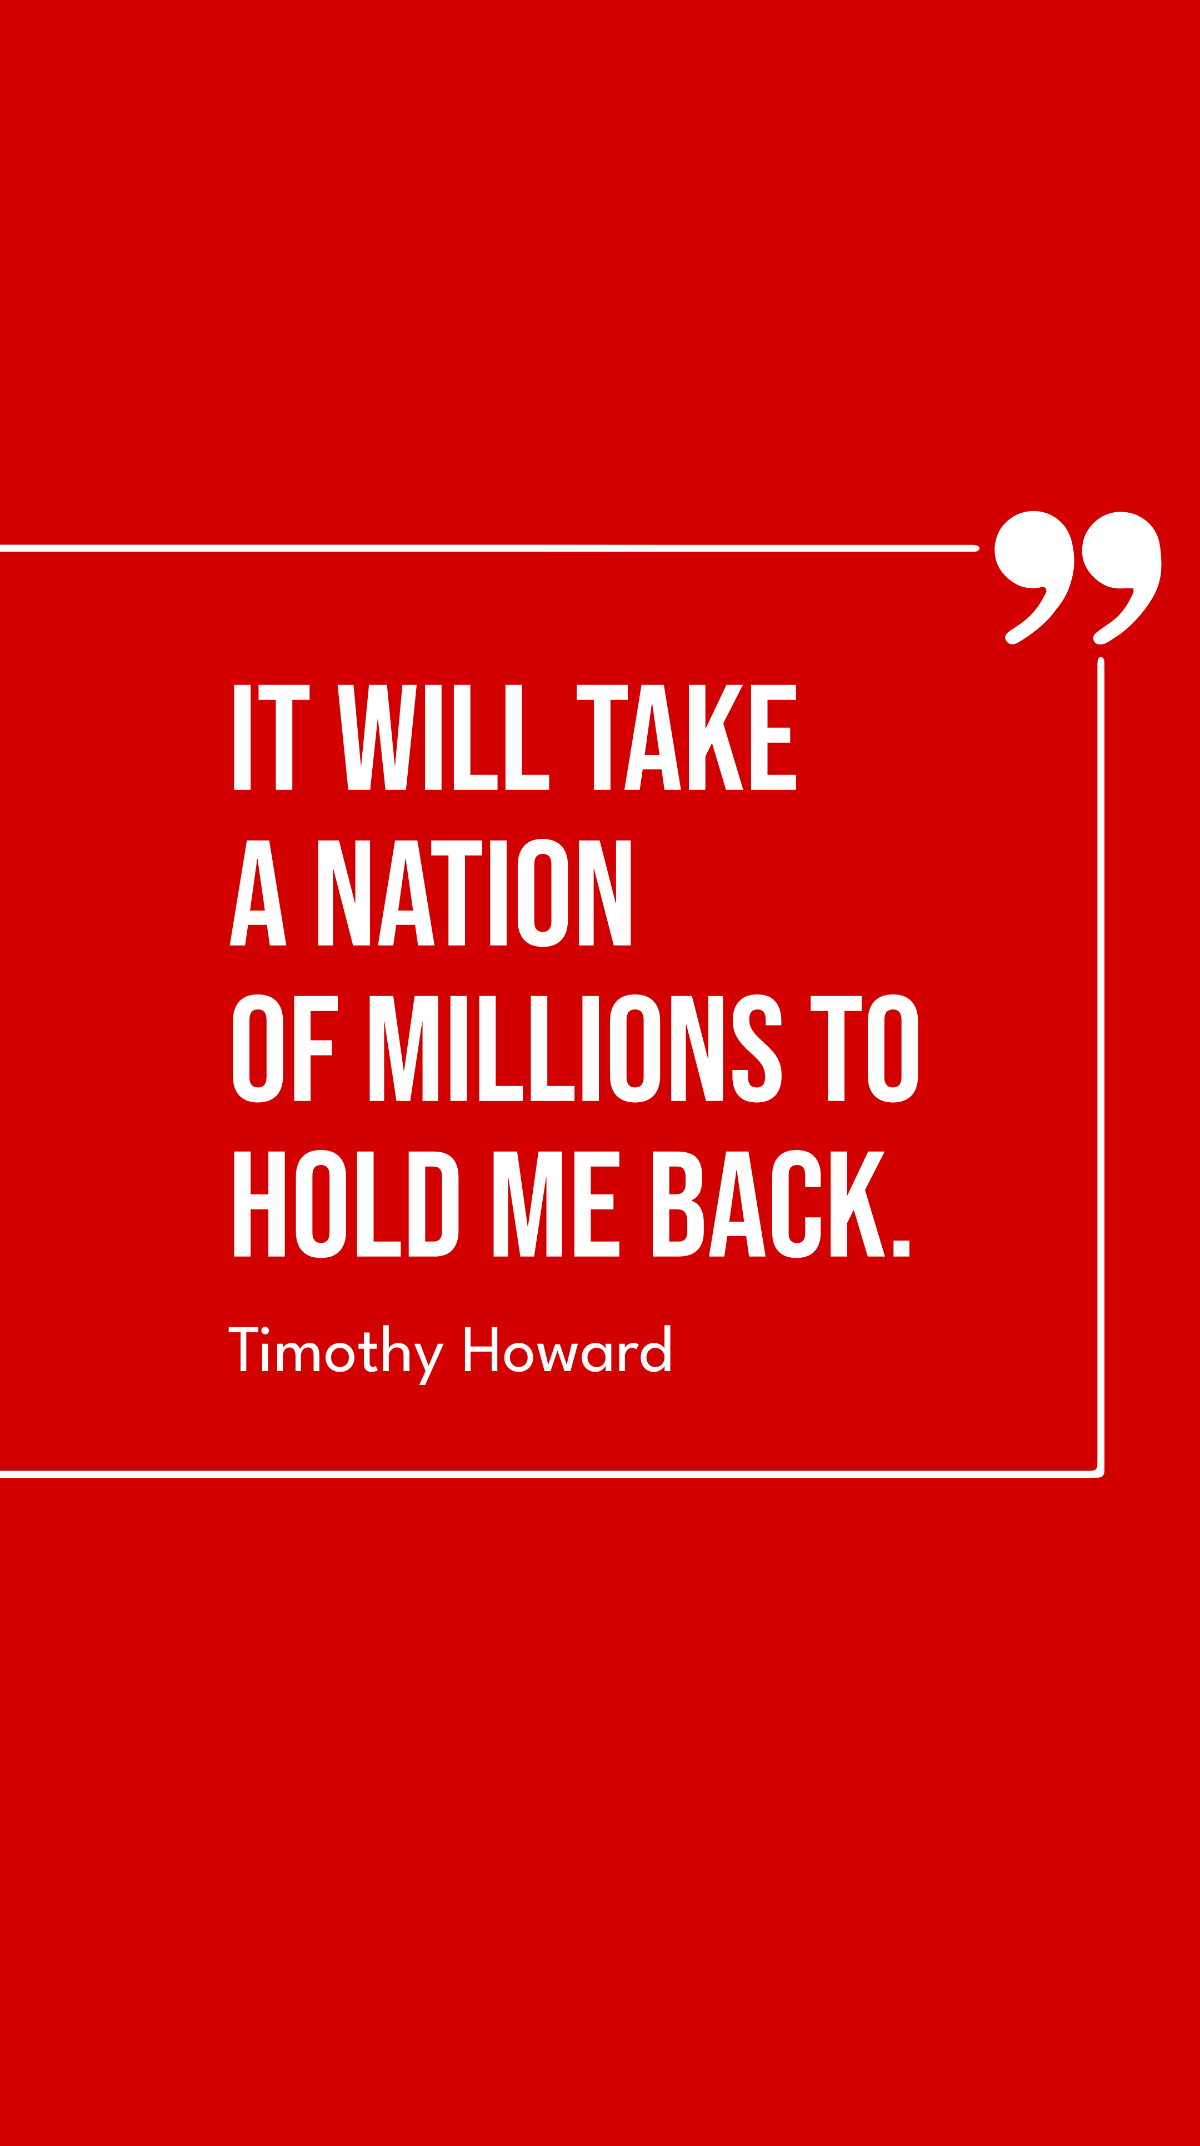 Timothy Howard - It will take a nation of millions to hold me back.